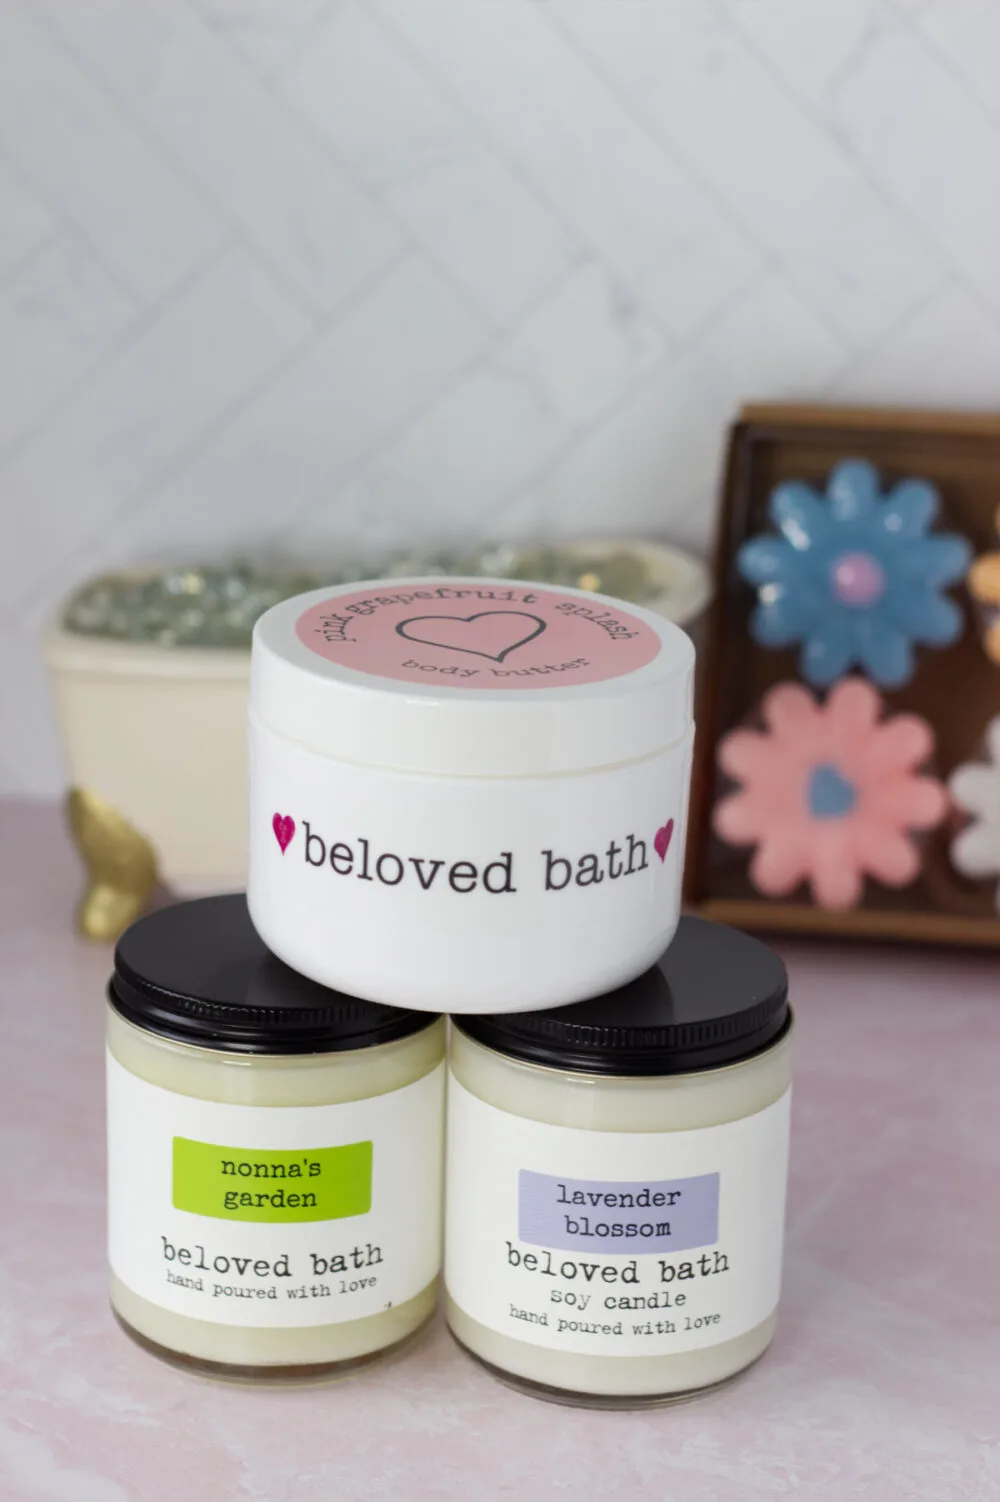 Candles and body butter from Beloved Bath.